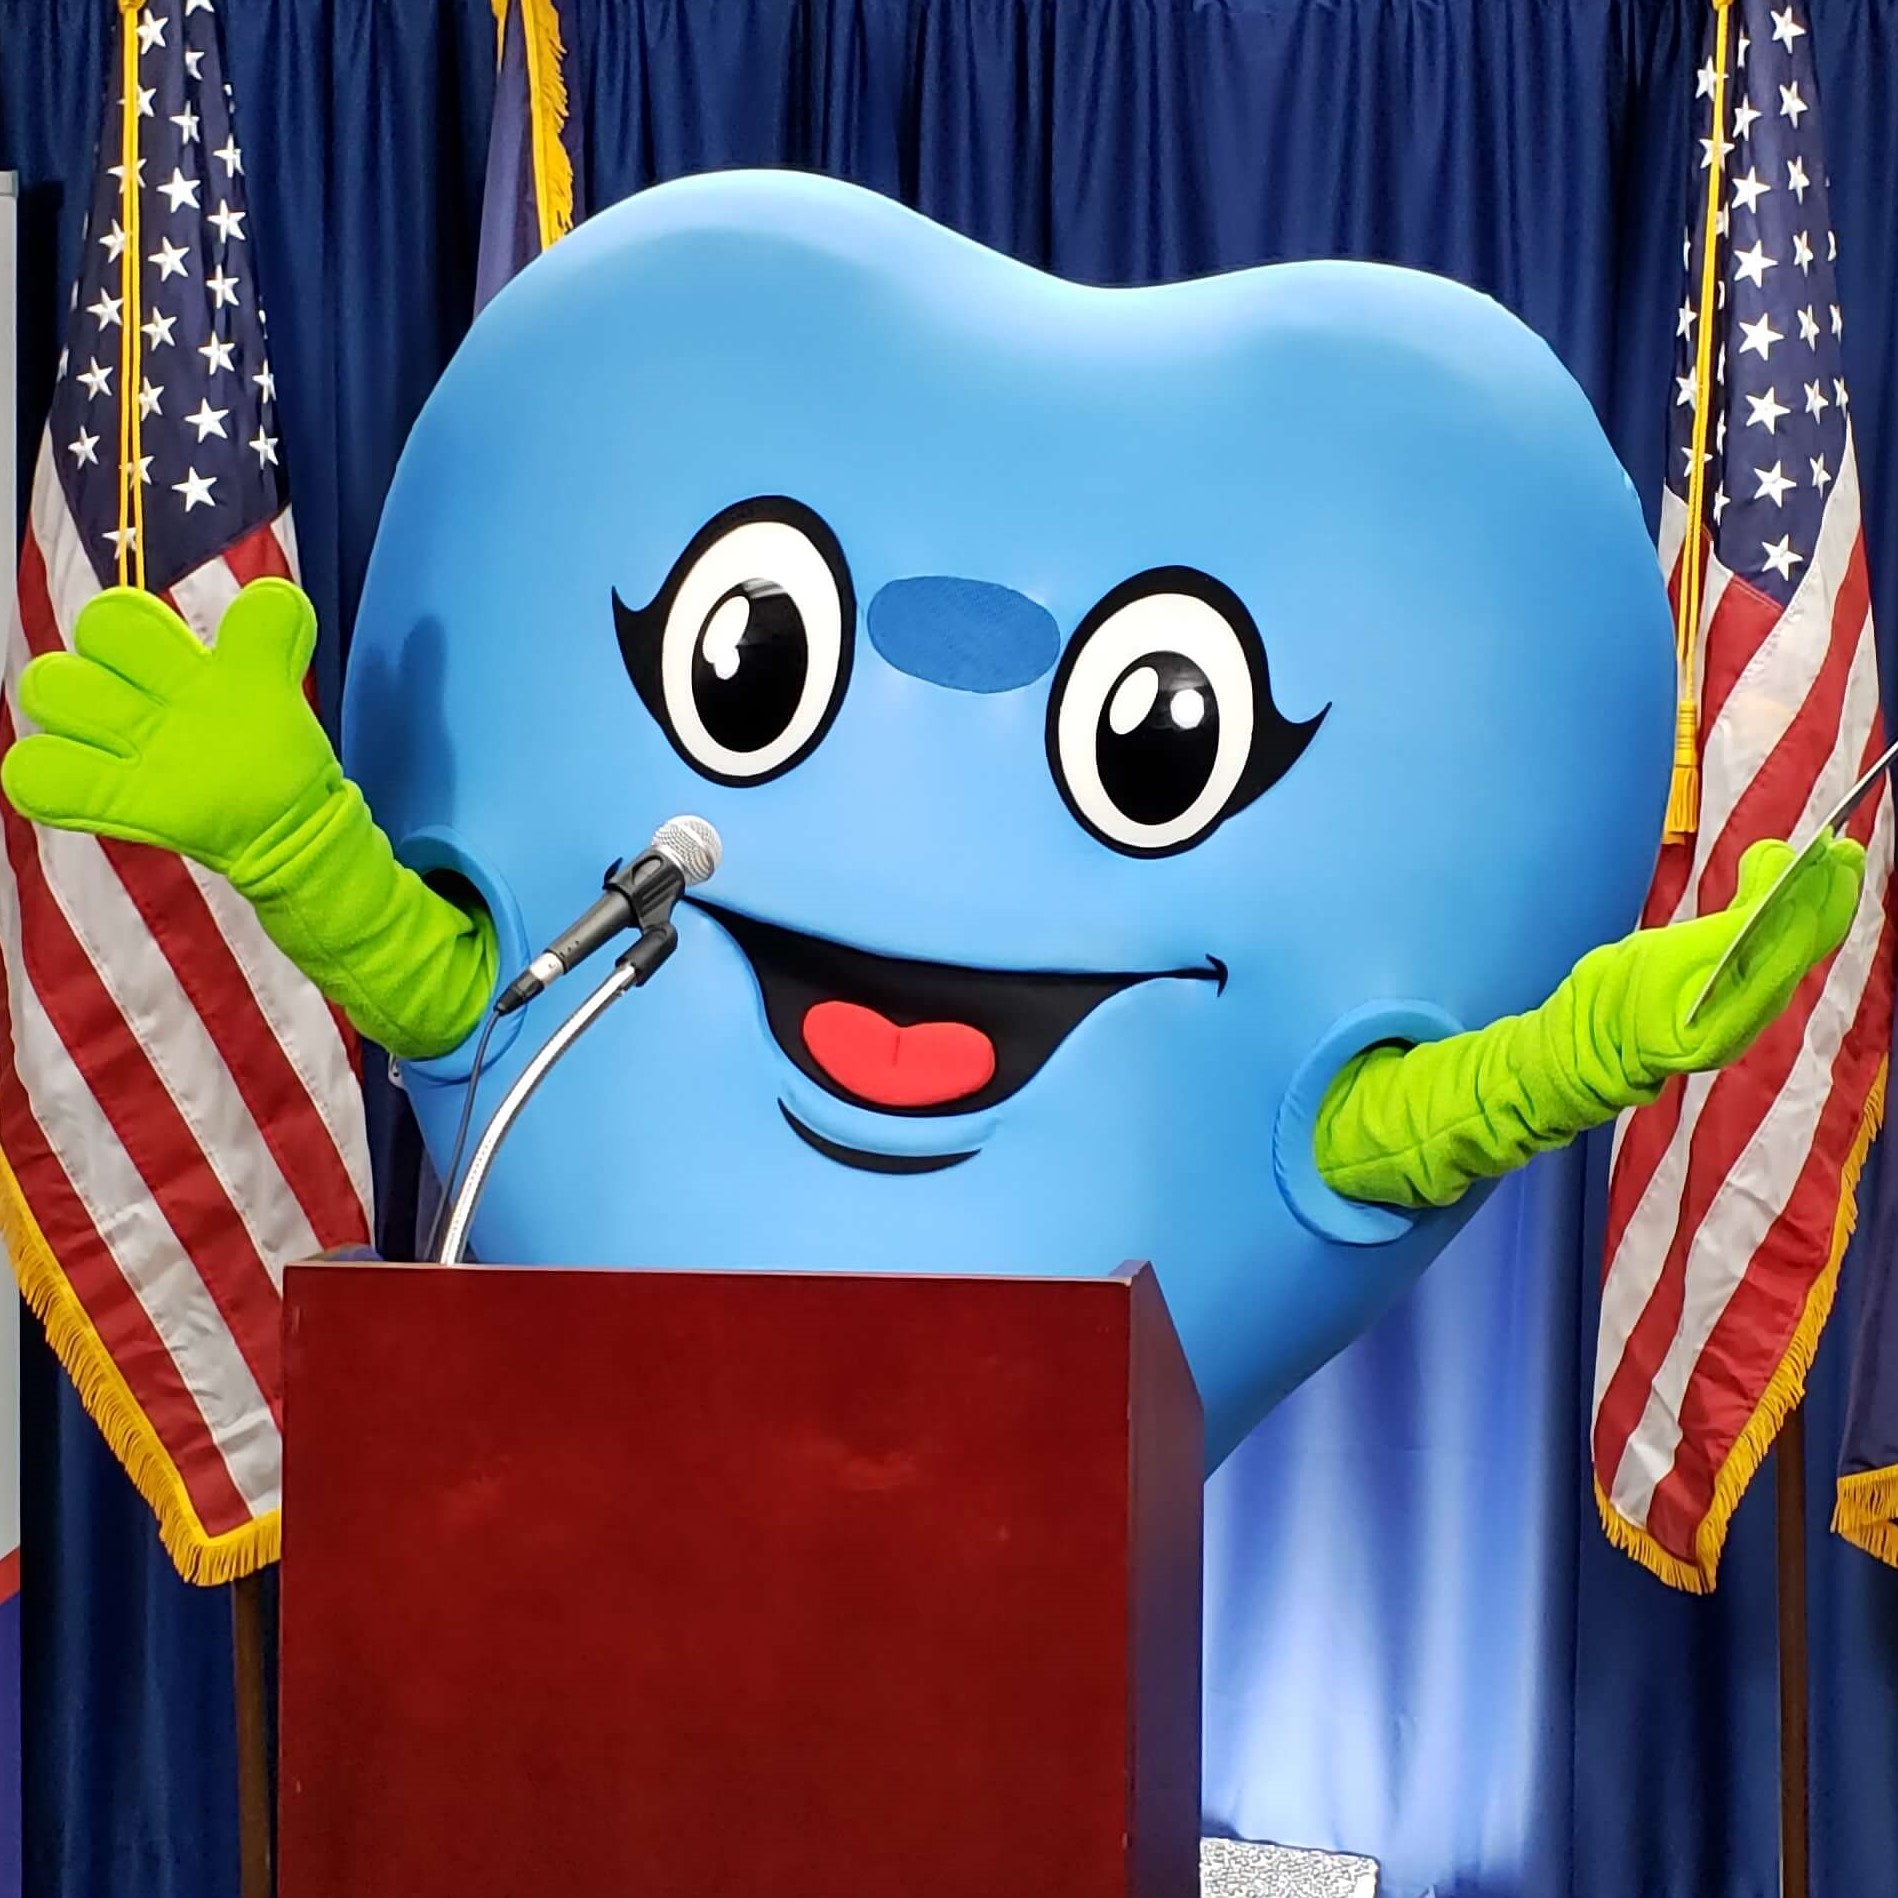 Hartley T. Heart, a large blue heart-shaped mascot, behind a podium with American flags on either side